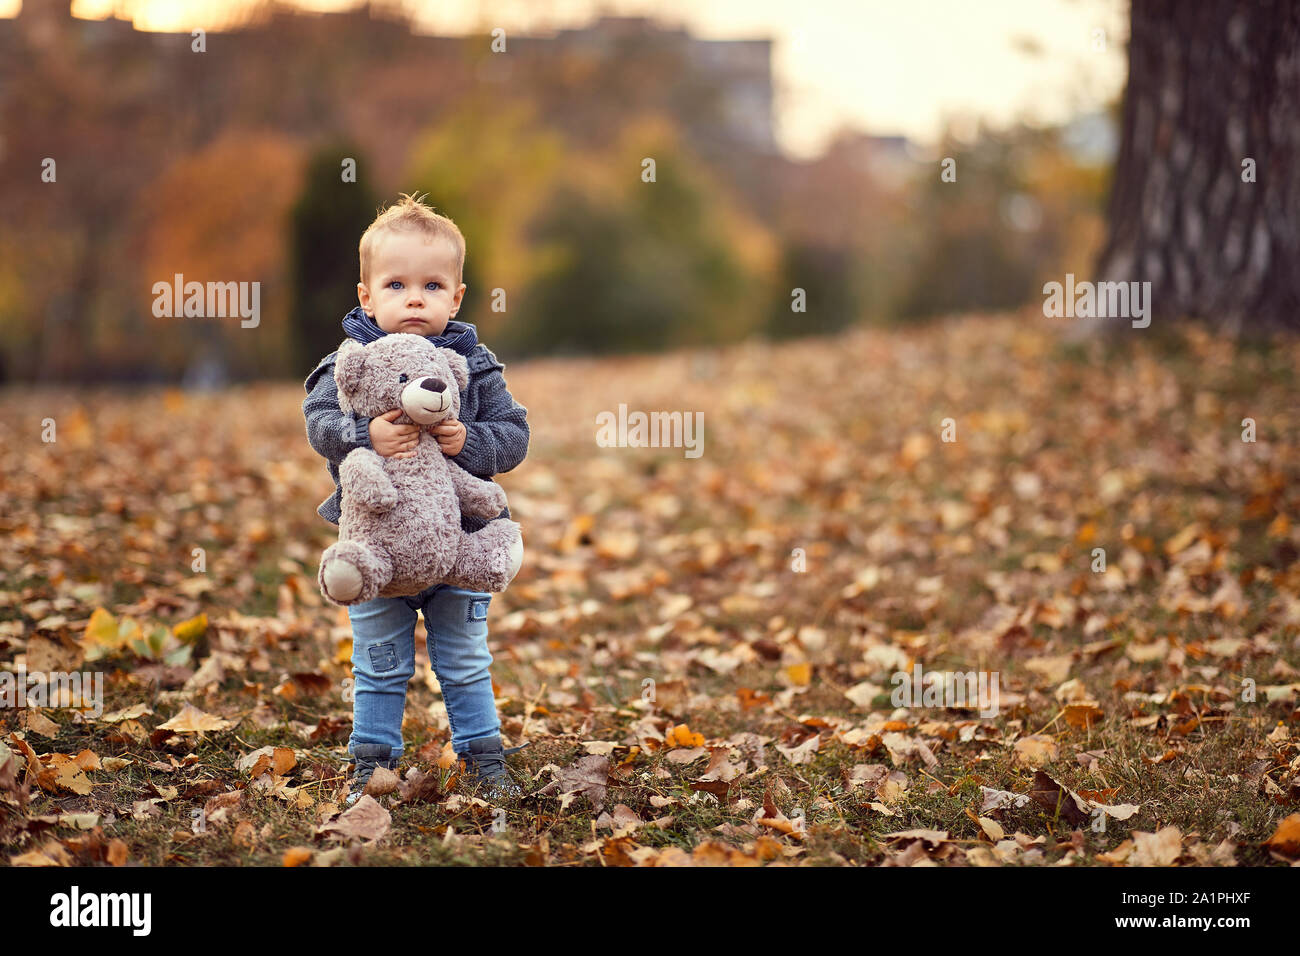 Happy child boy playing, smiling and having fun in autumn city park. Bright yellow trees and leaves Stock Photo